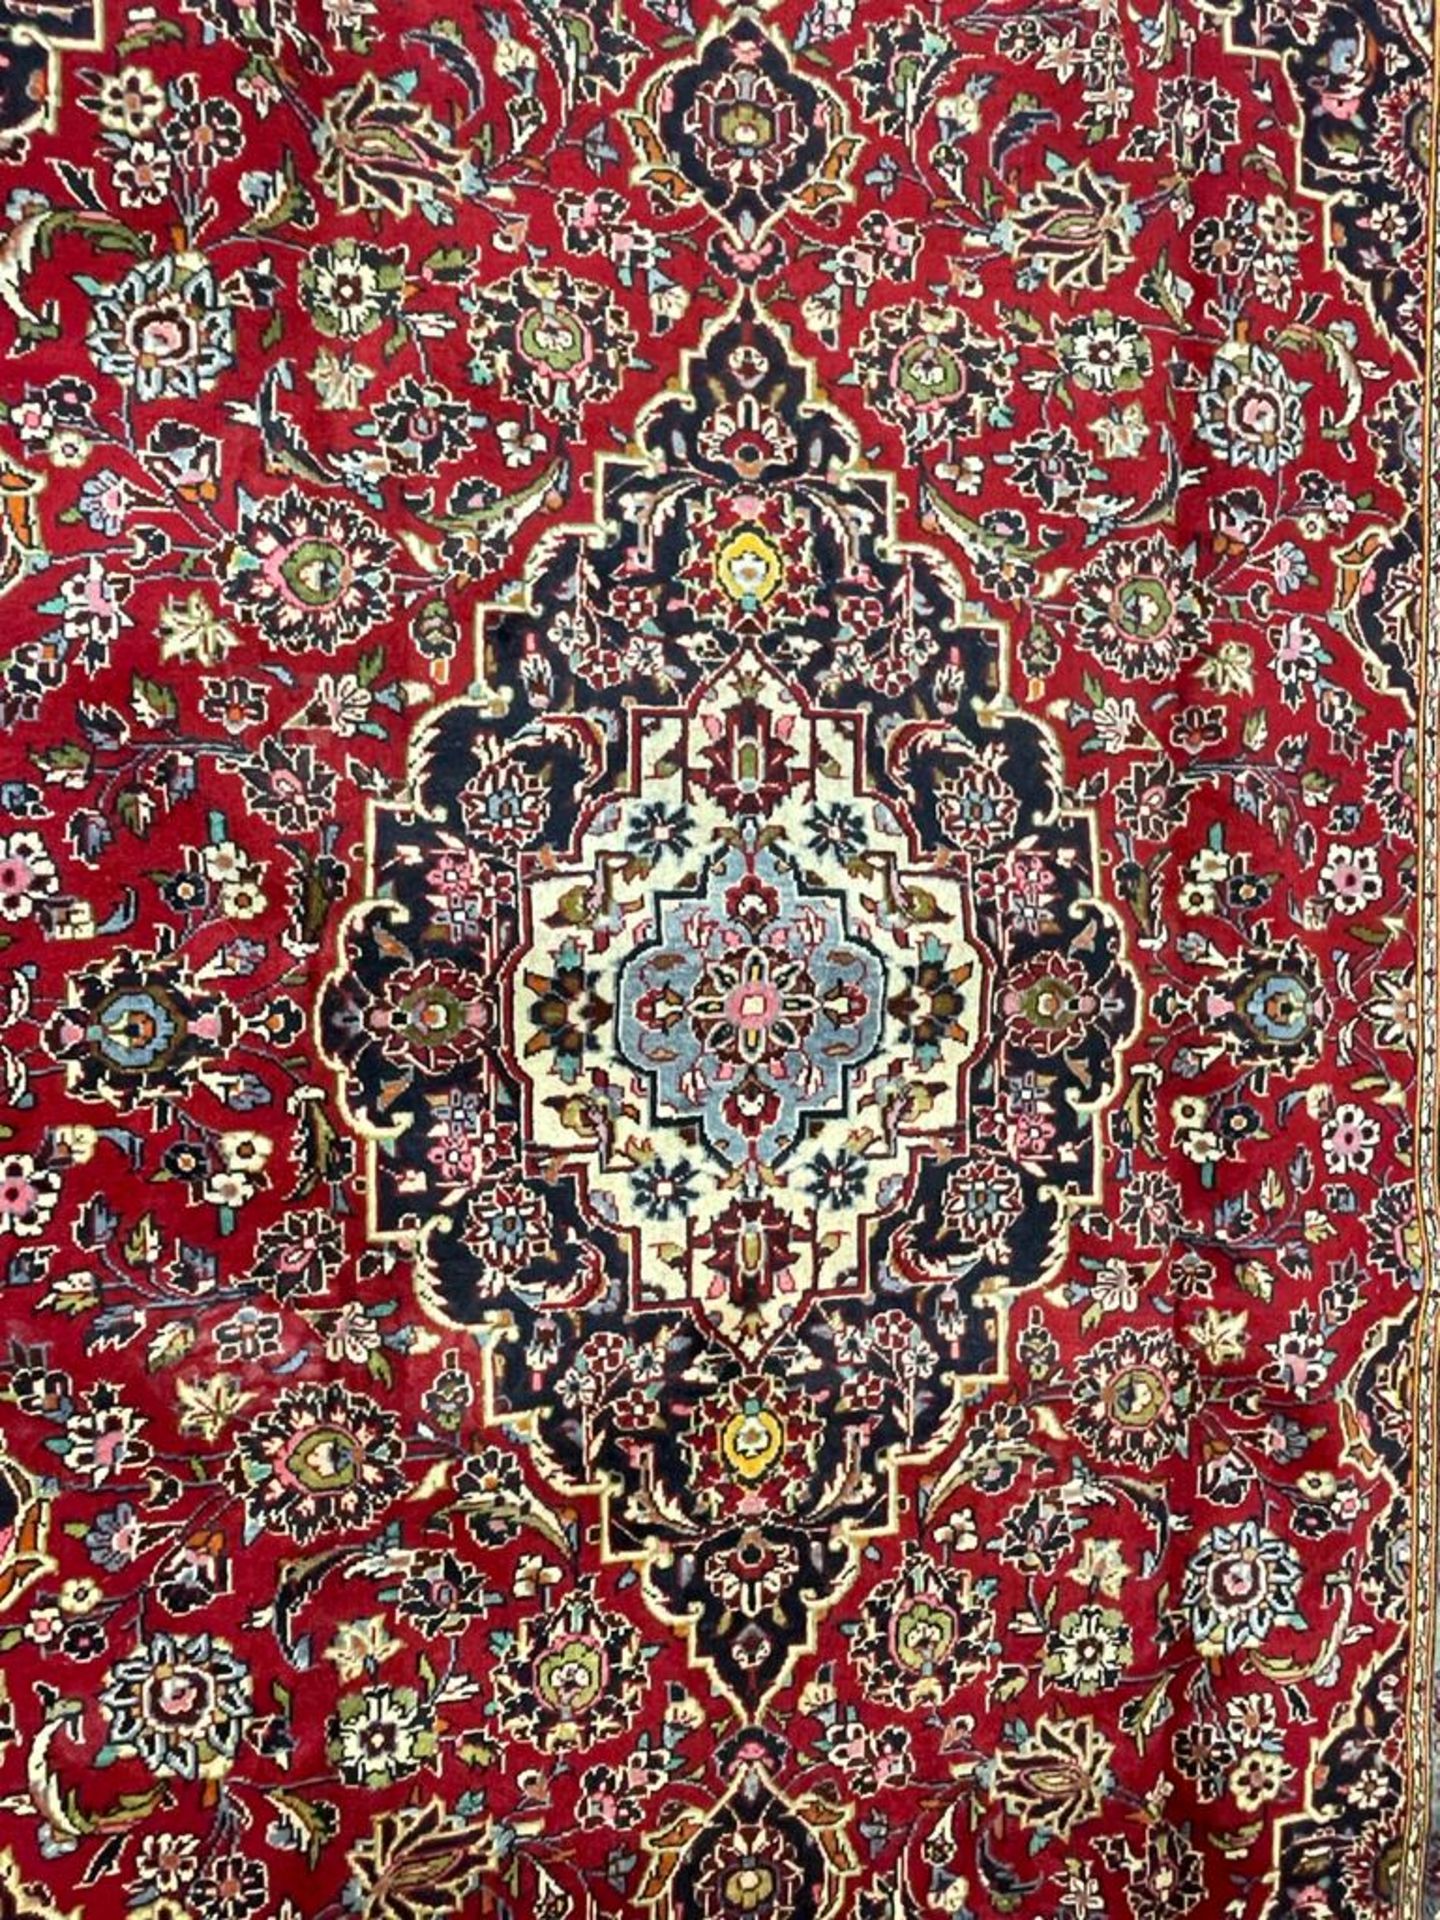 LARGE 20TH CENTURY CENTRAL PERSIAN ISLAMIC KASHAN FLOOR RUG - Image 2 of 5